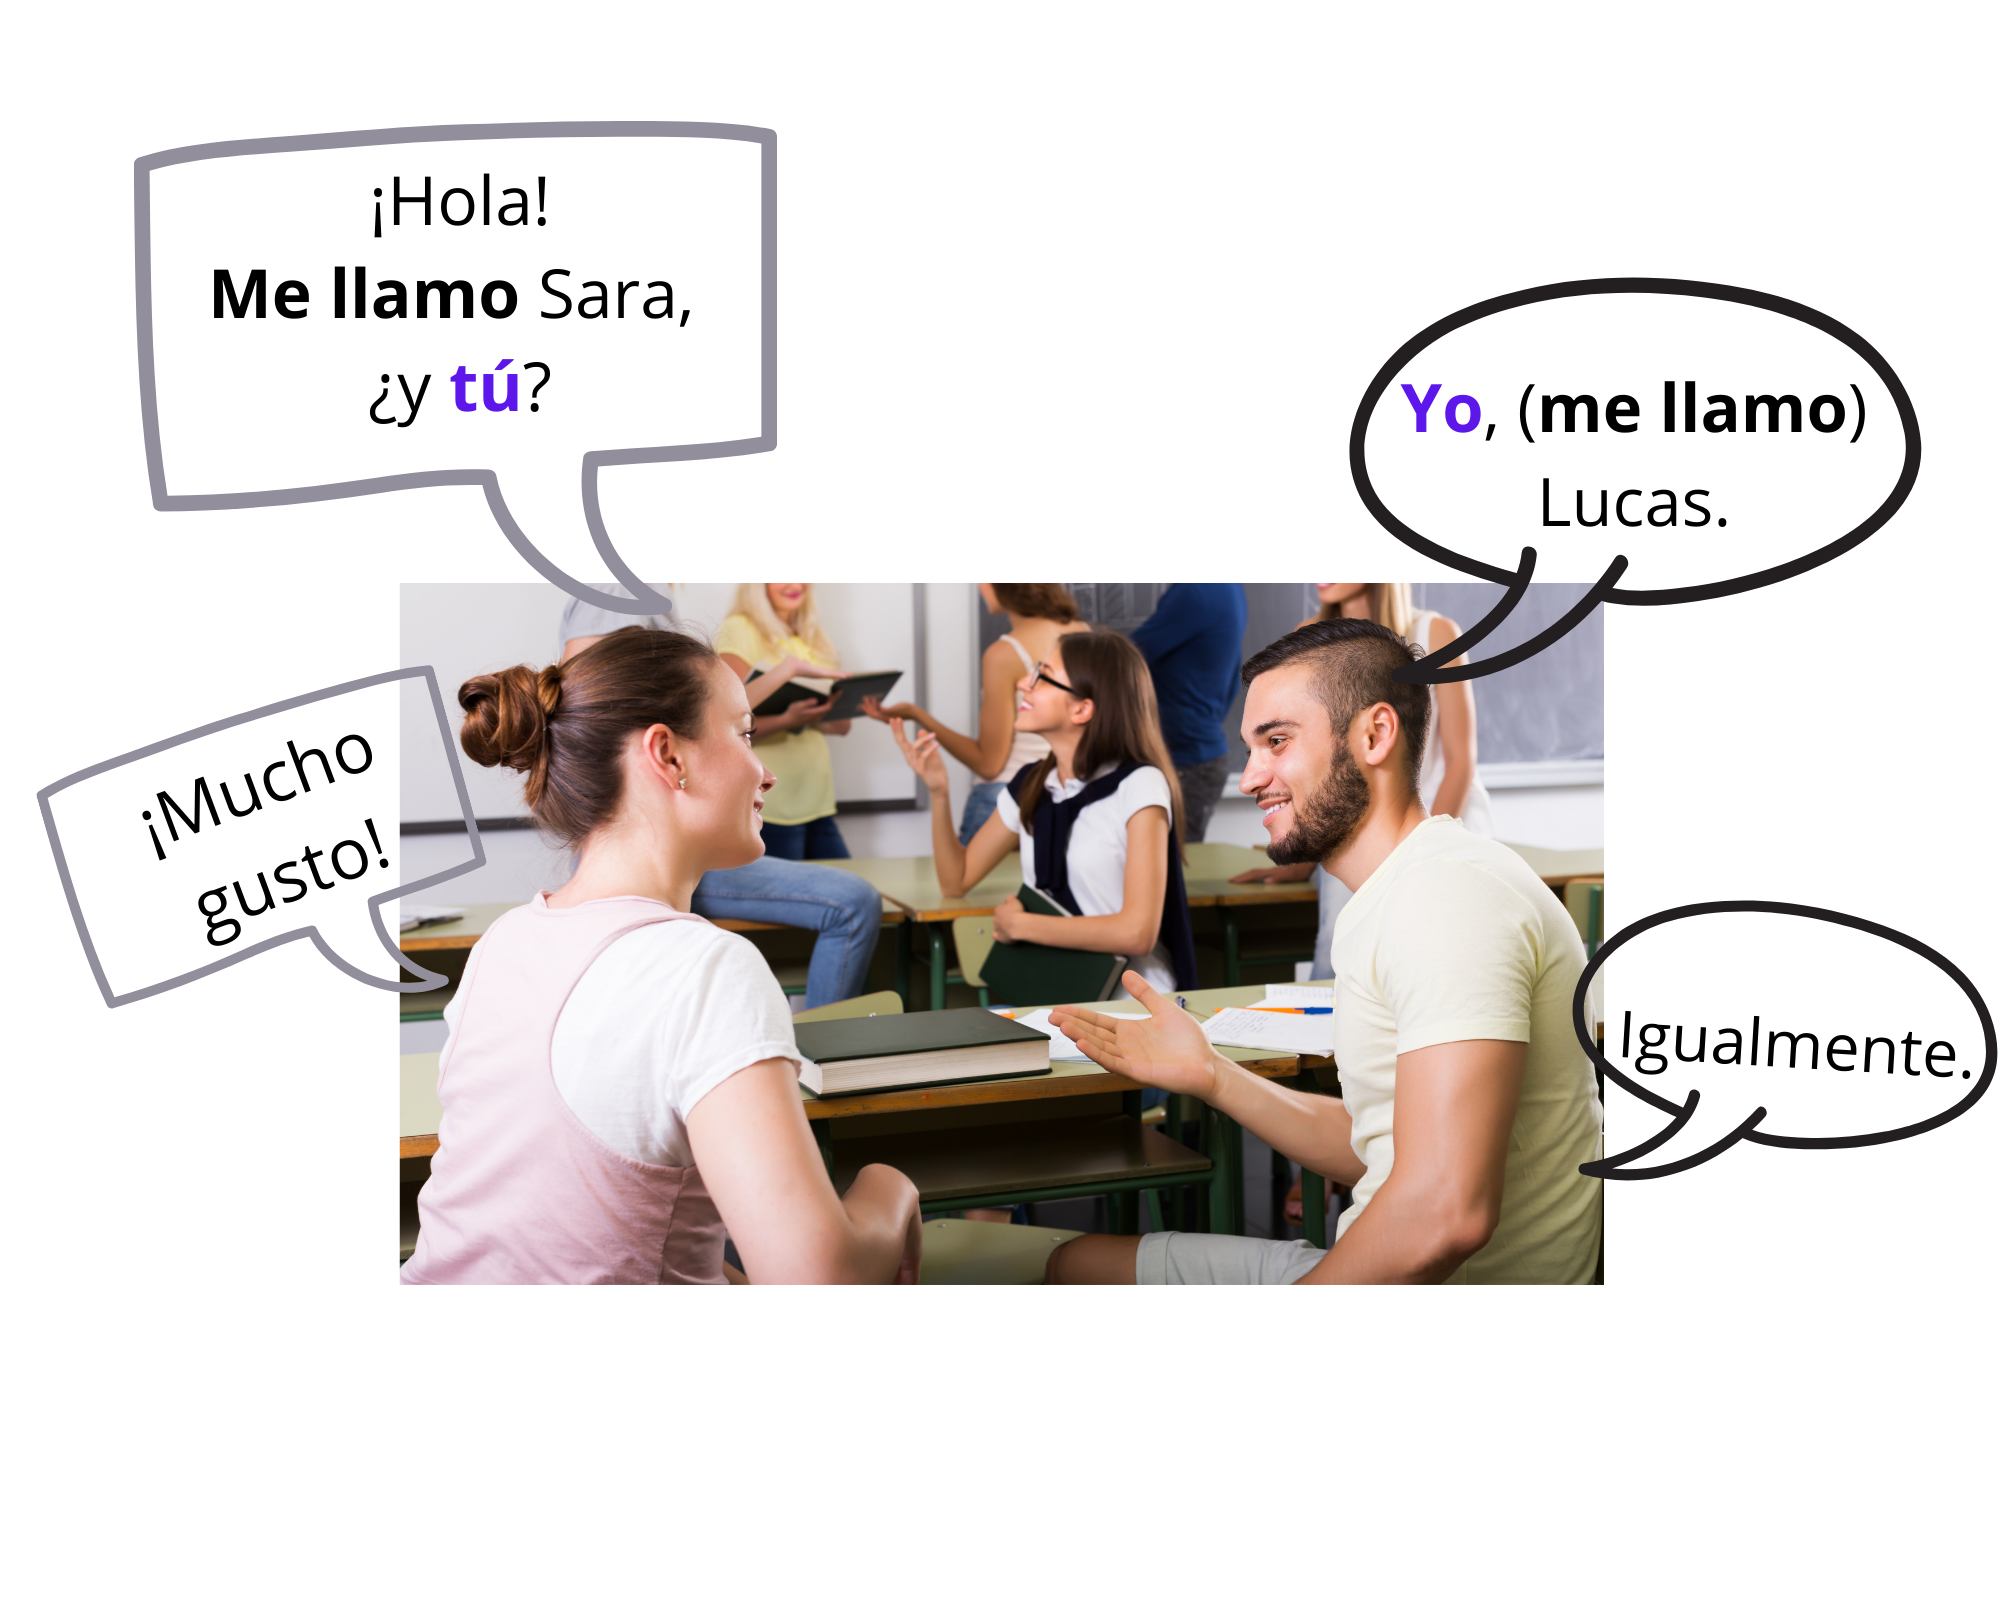 Image of couple introducing themselves with text in speech bubbles